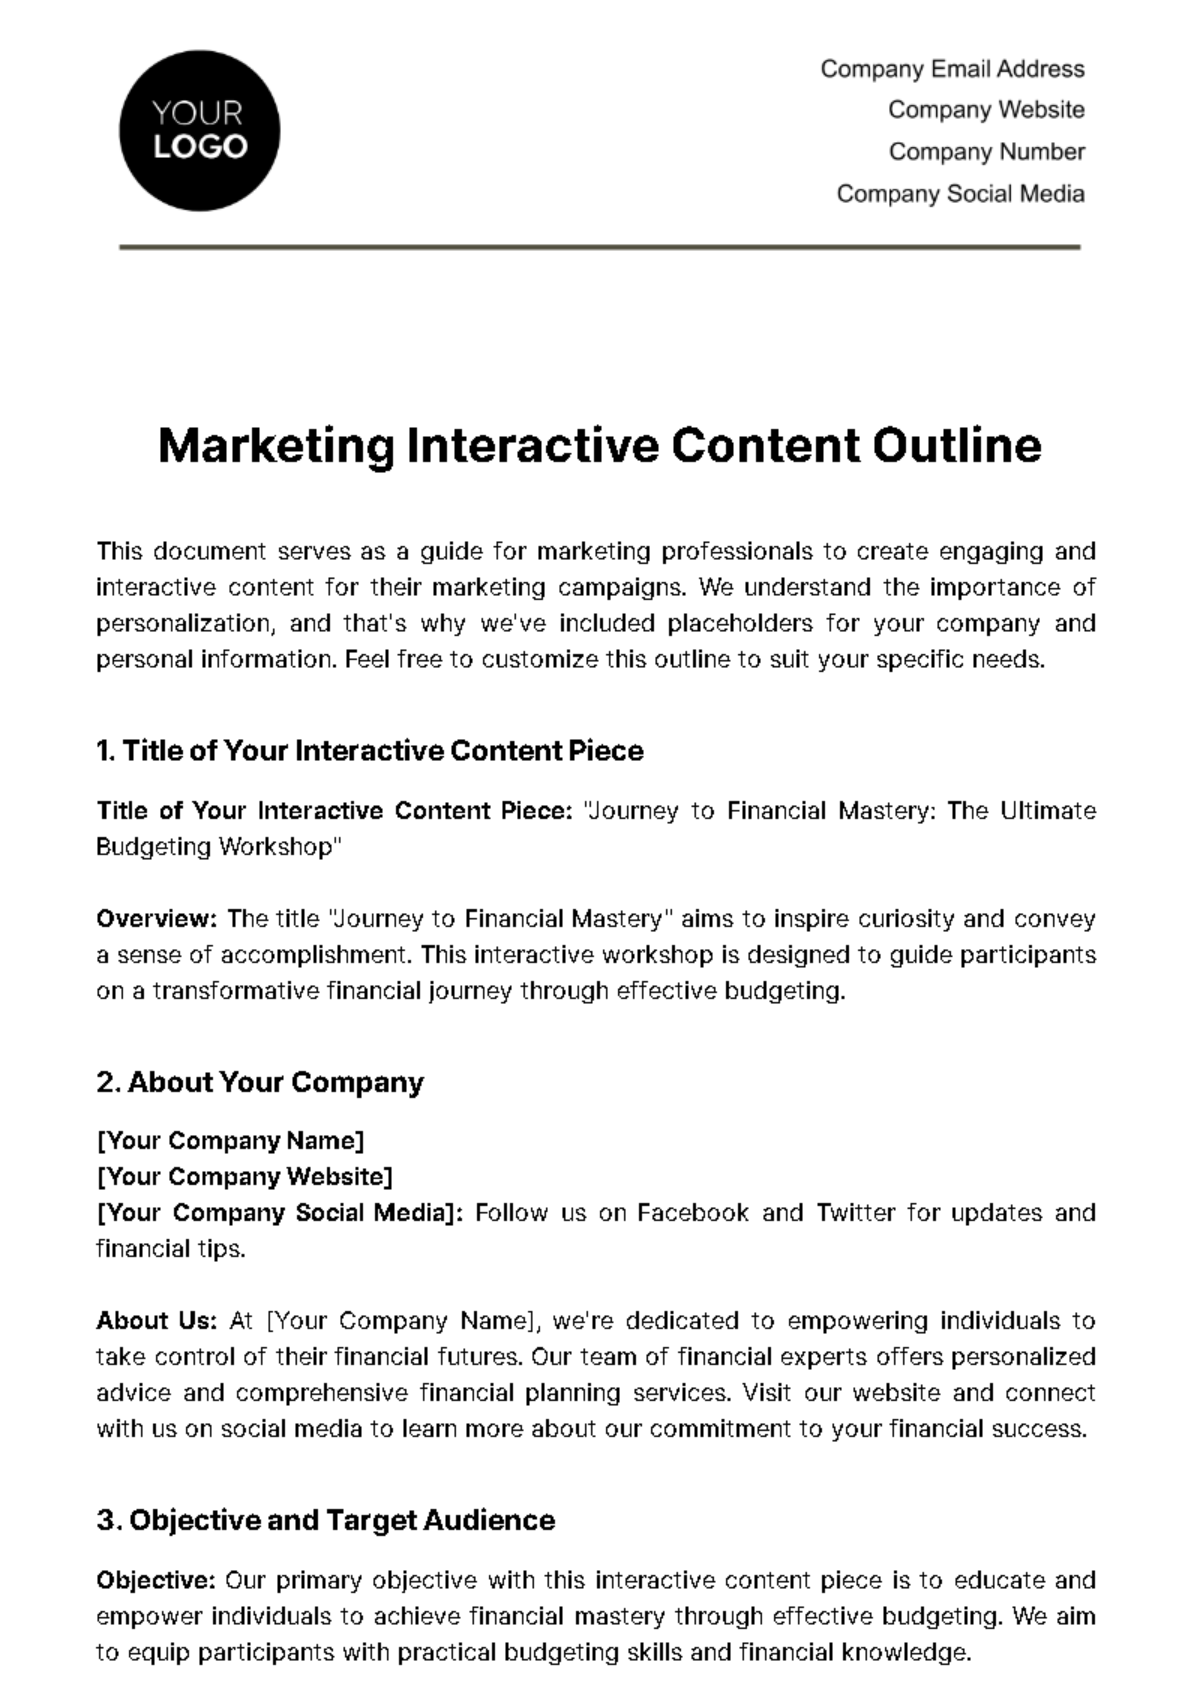 Marketing Interactive Content Outline Template